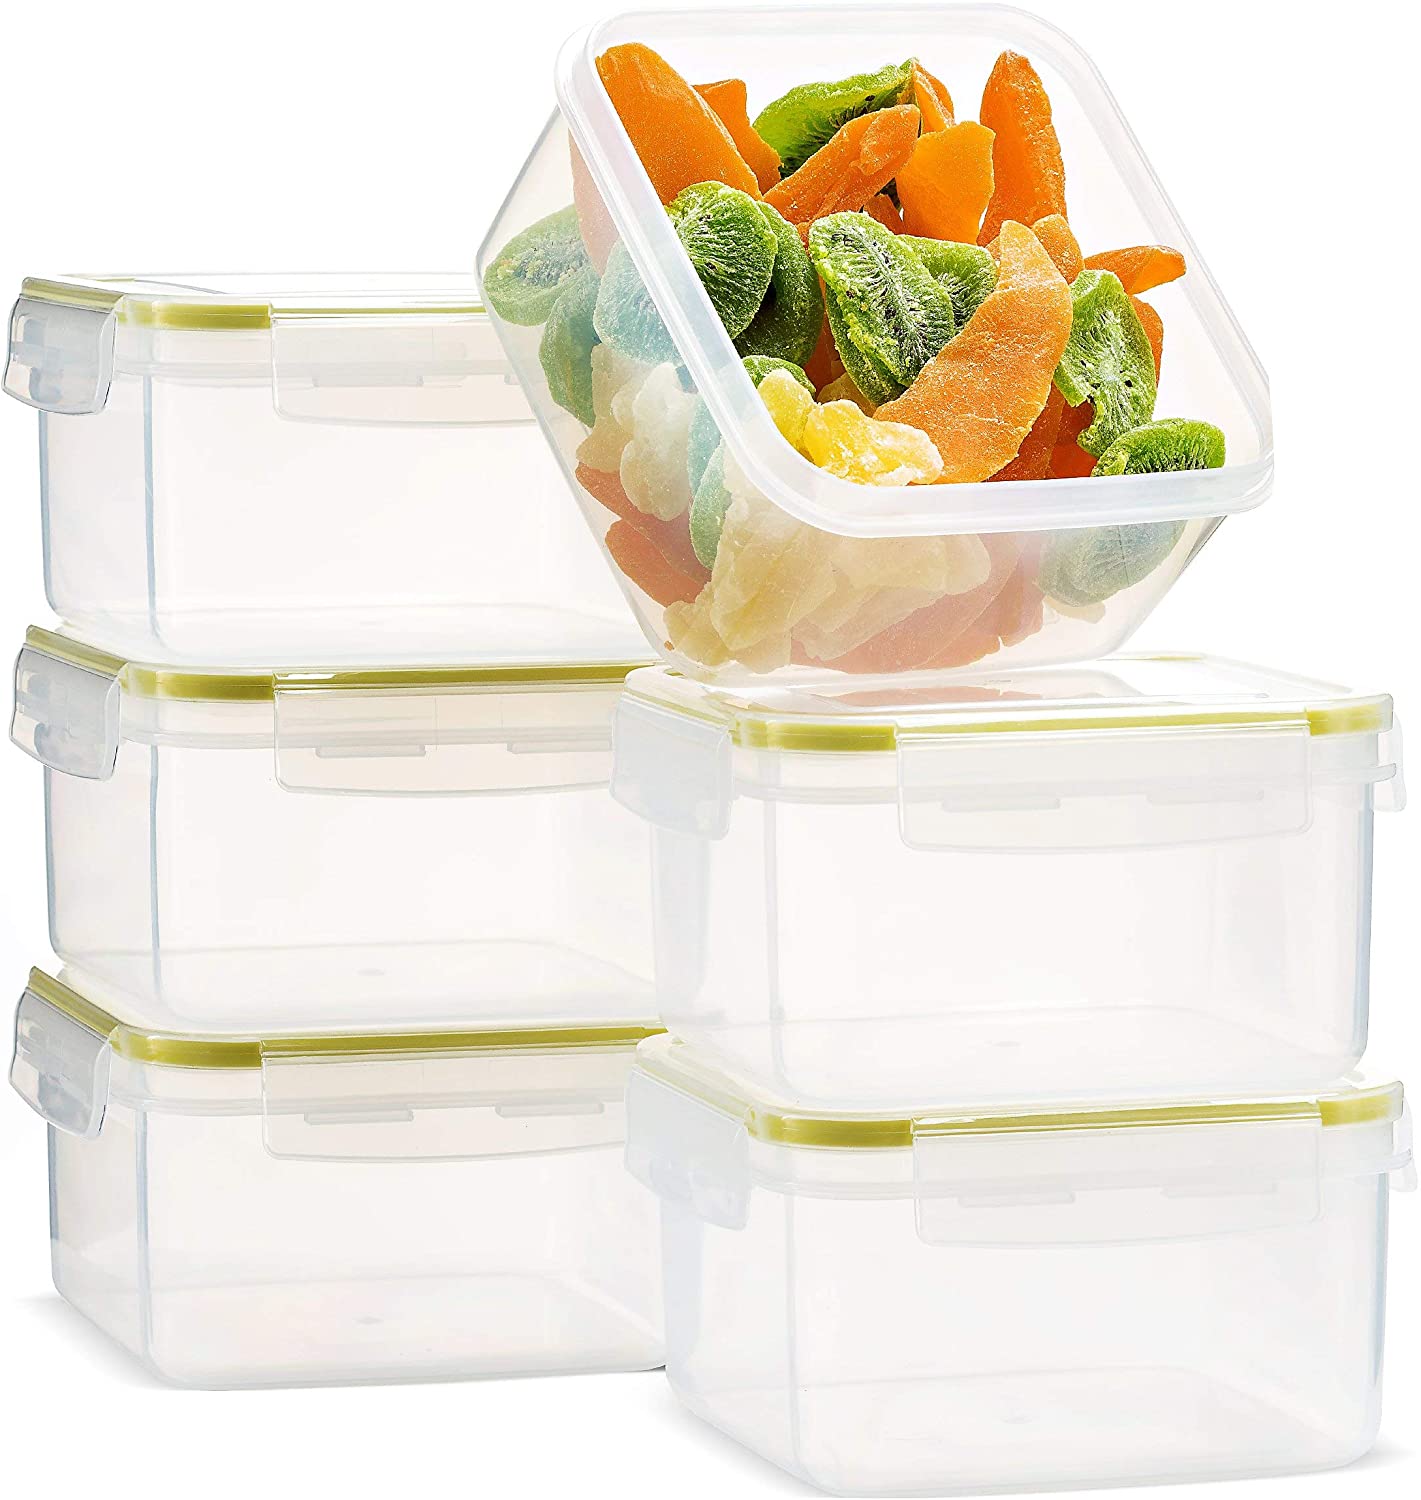 Komax Biokips Narrow Bread Box Container with Tray 118.3 oz. - Airtight,  Leakproof With Locking Lid - BPA Free Food Storage Container- Freezer and  Dishwasher Sa…